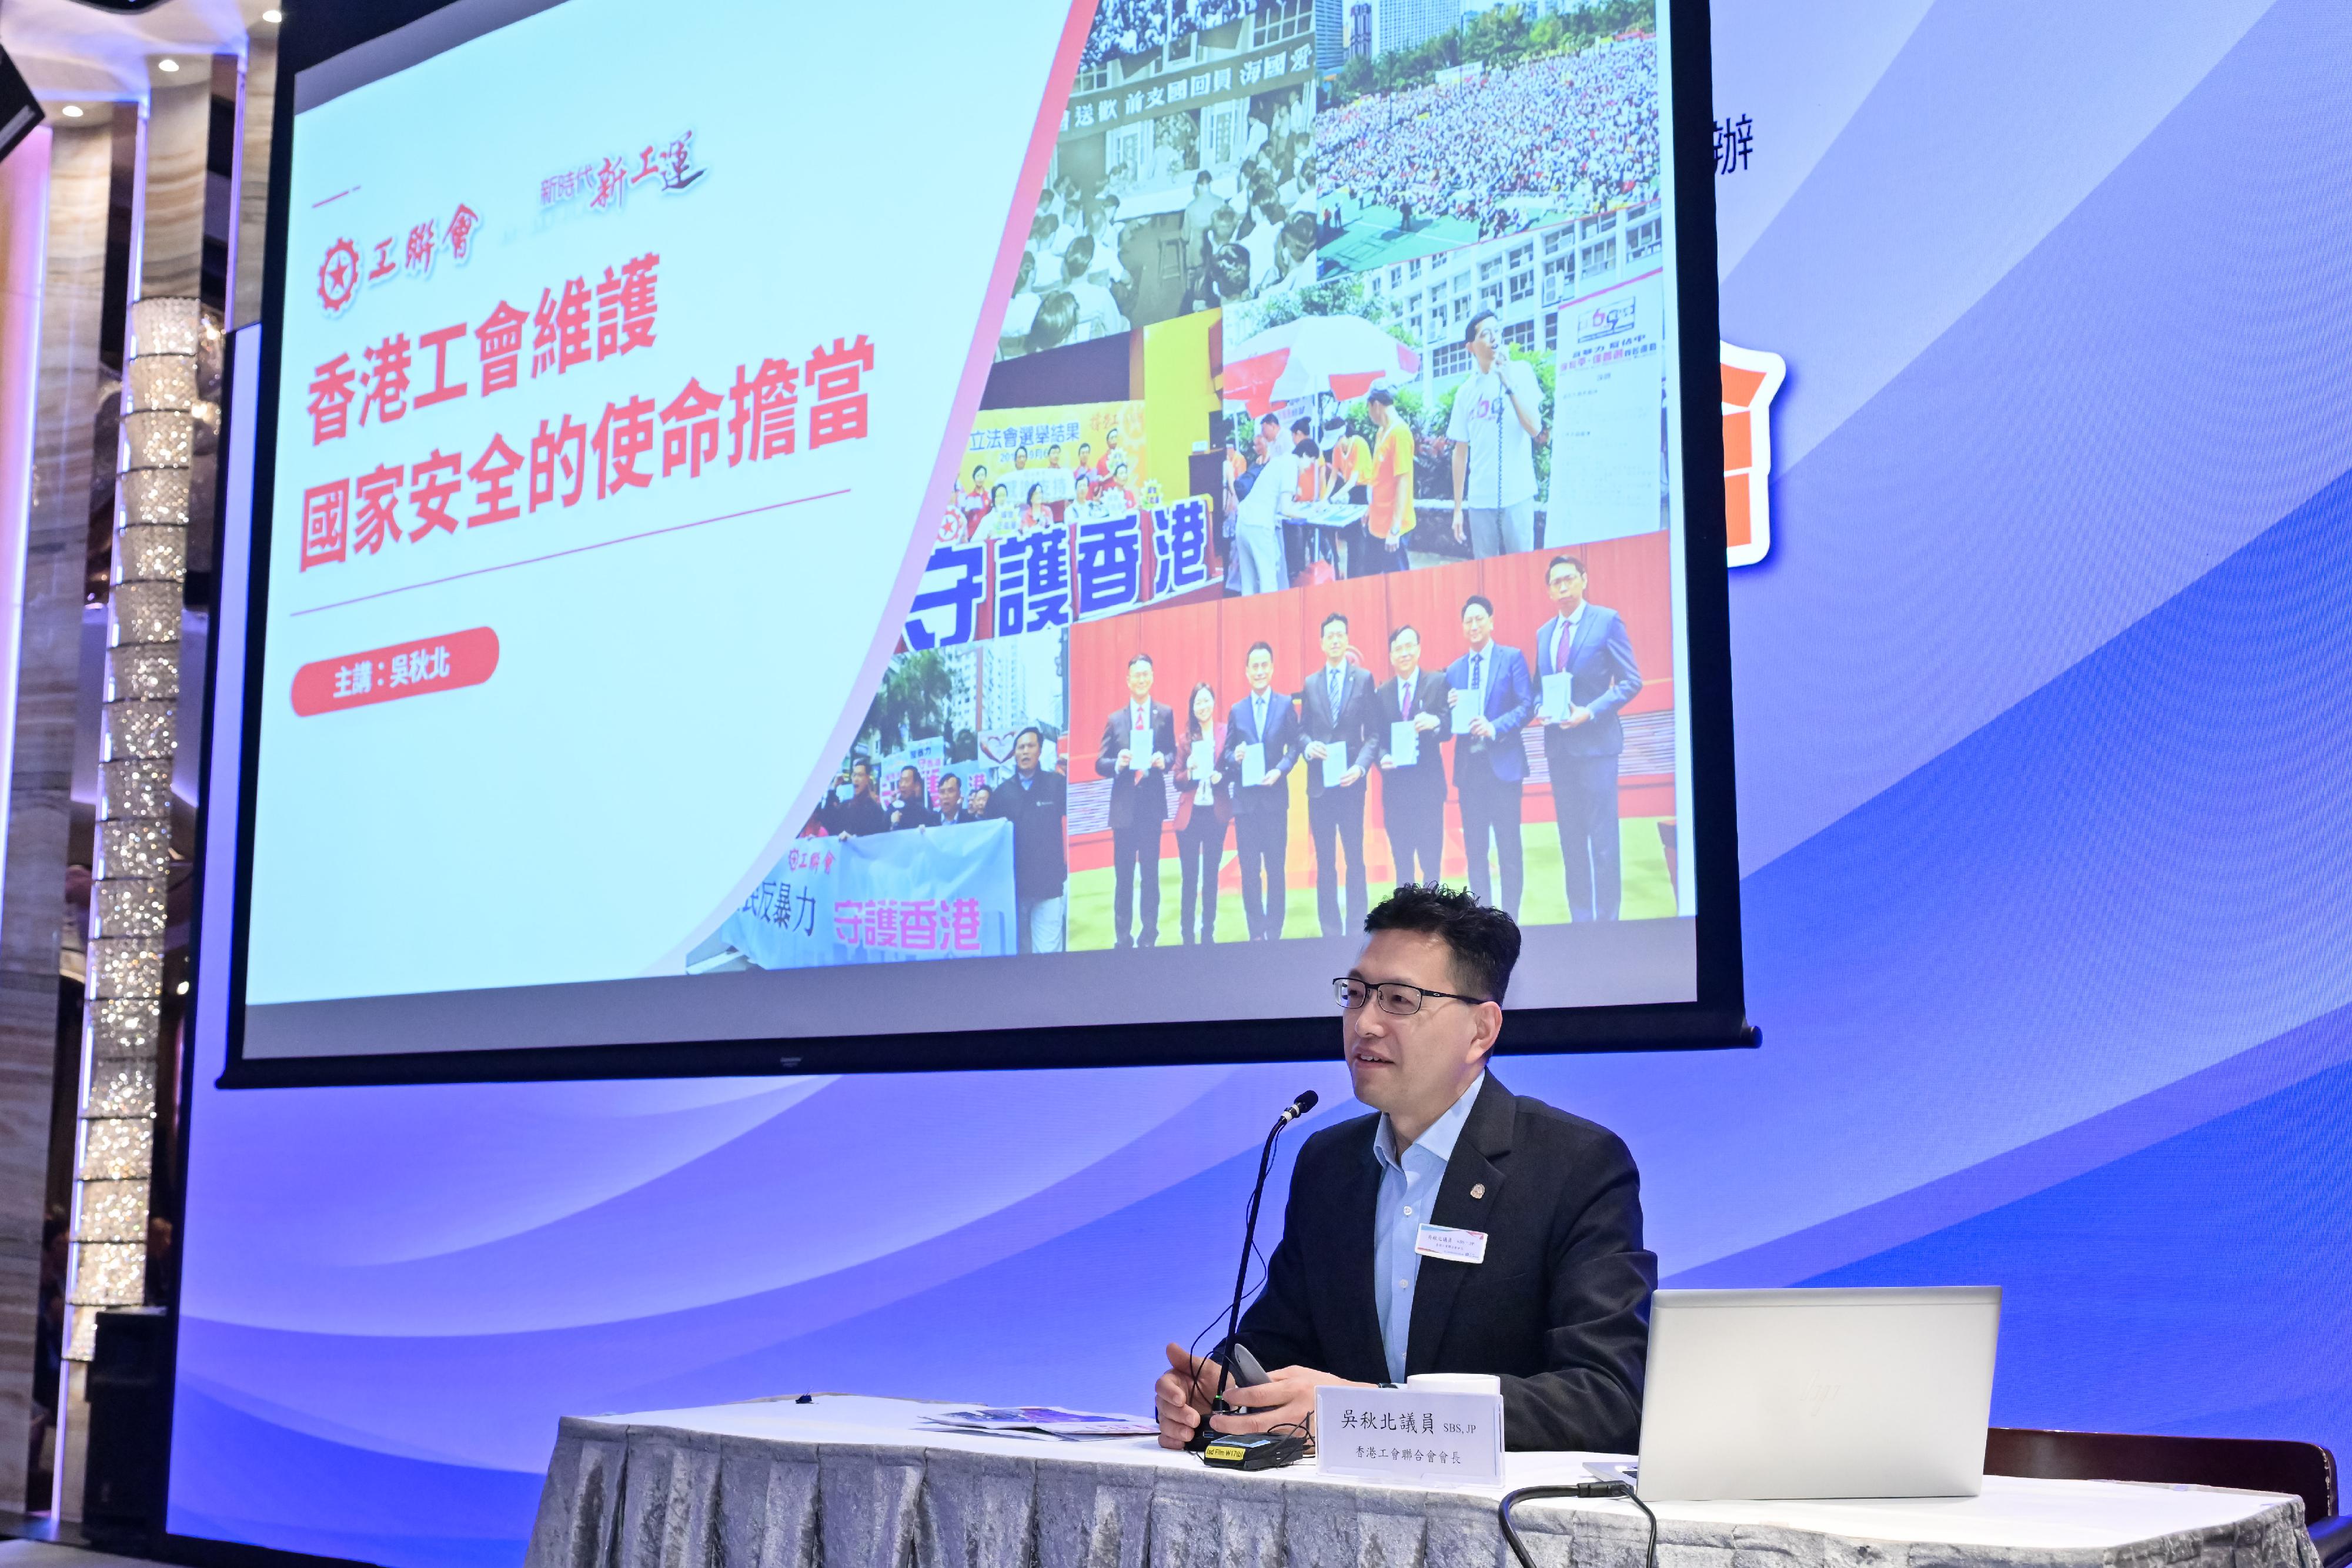 The Registry of Trade Unions of the Labour Department held today (April 13) the Seminar on National Security for Trade Unions. Photo shows Legislative Council Member and the President of the Hong Kong Federation of Trade Unions, Mr Stanley Ng, delivering a talk.
